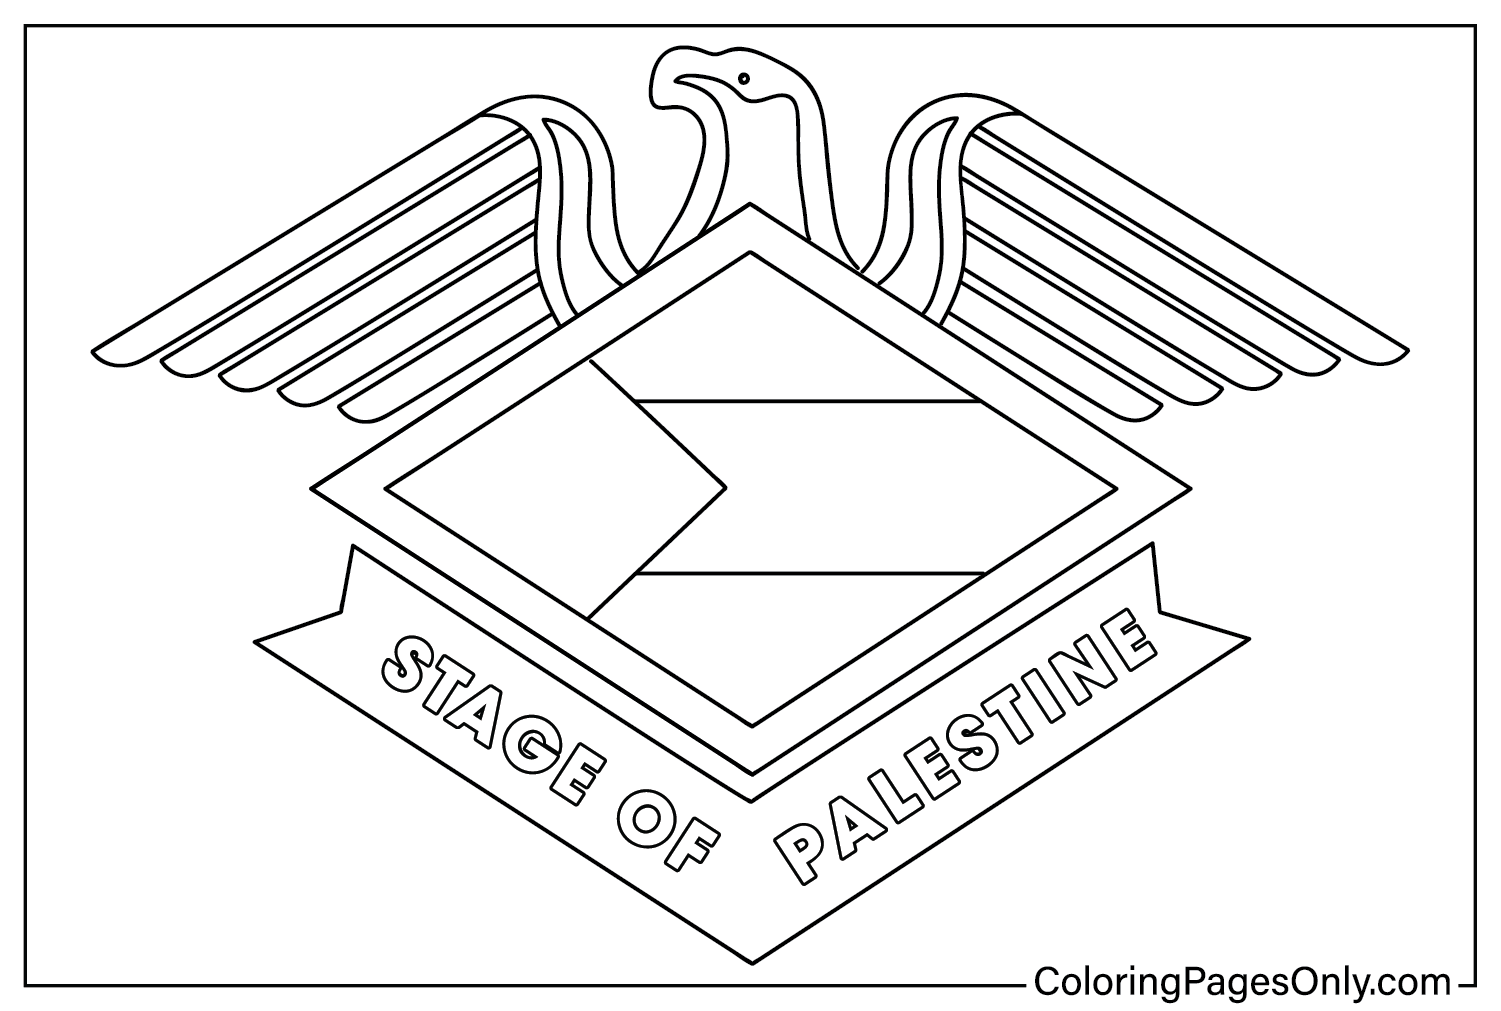 Palestine Coloring Page to Print from Palestine